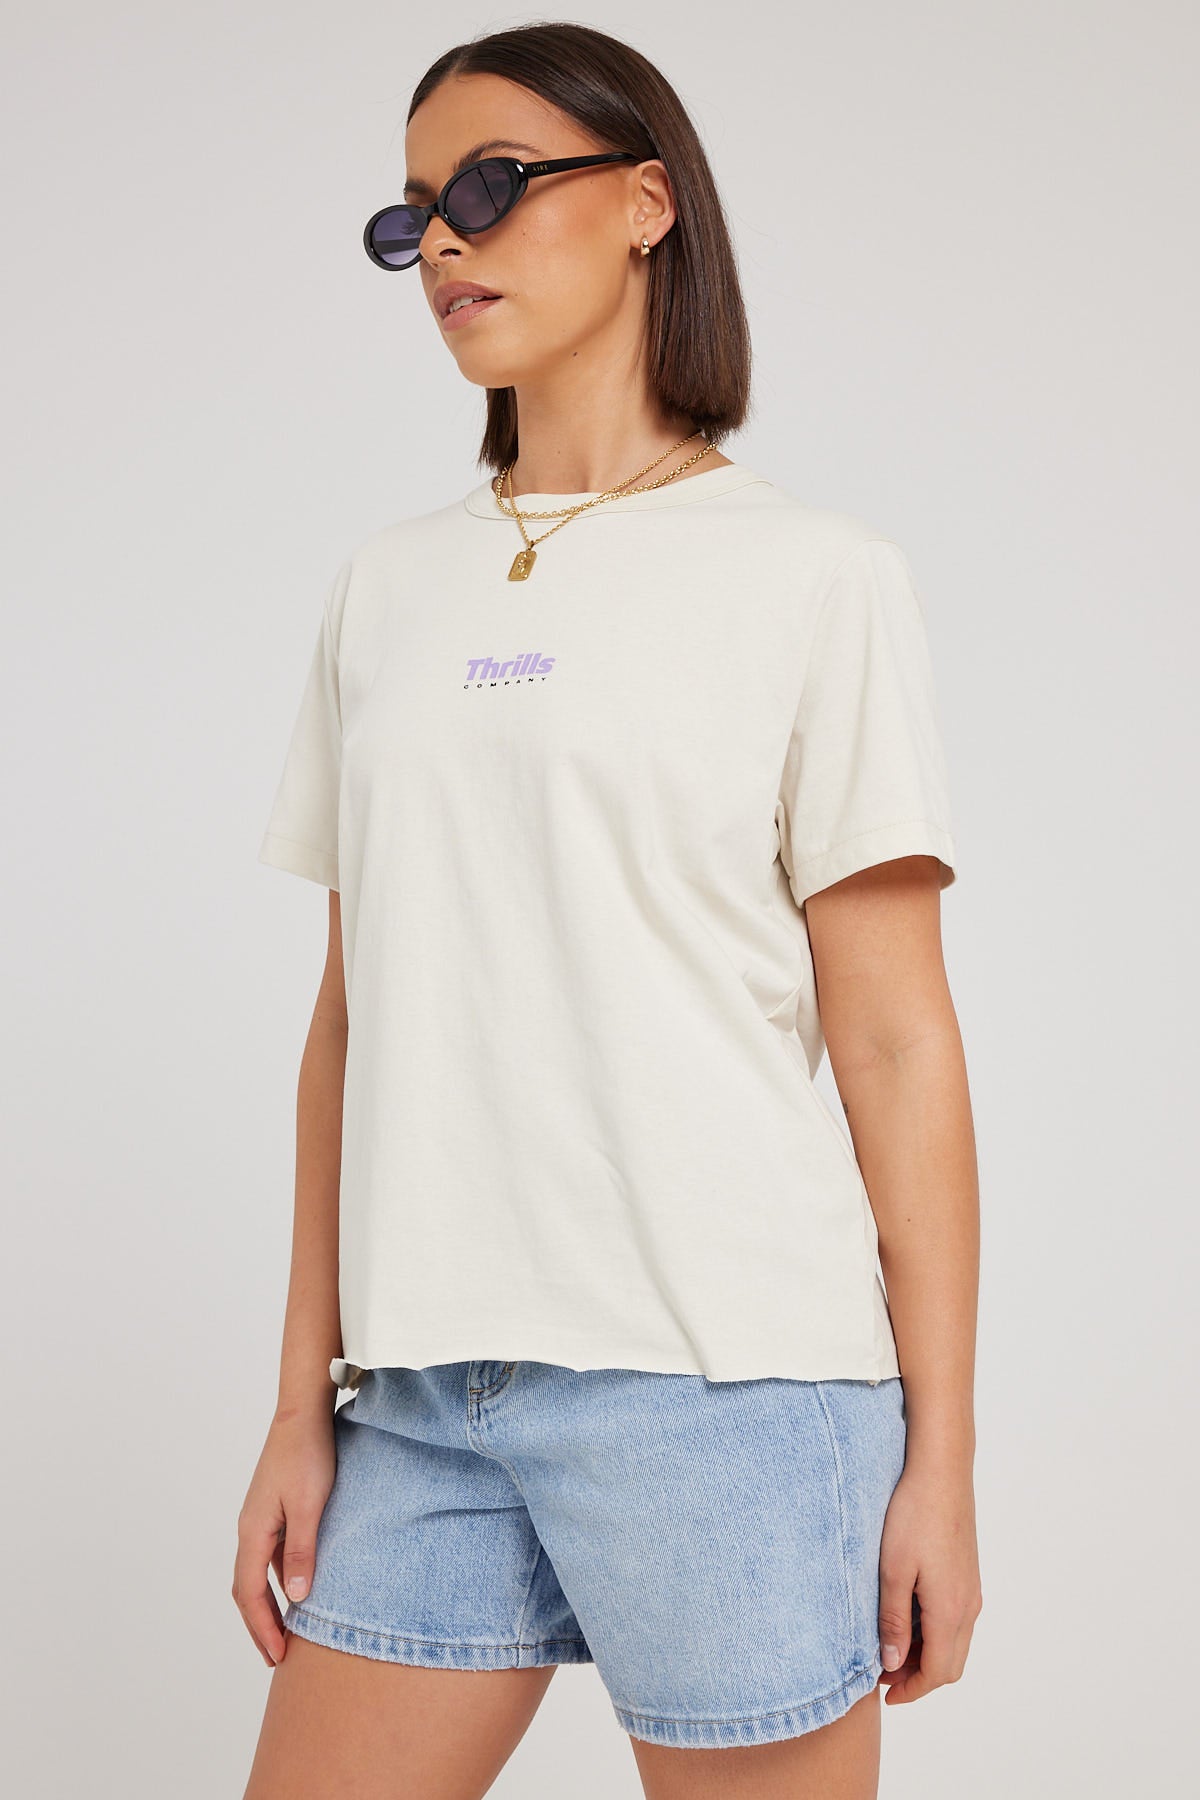 Thrills Paradox Relaxed Fit Tee Heritage White